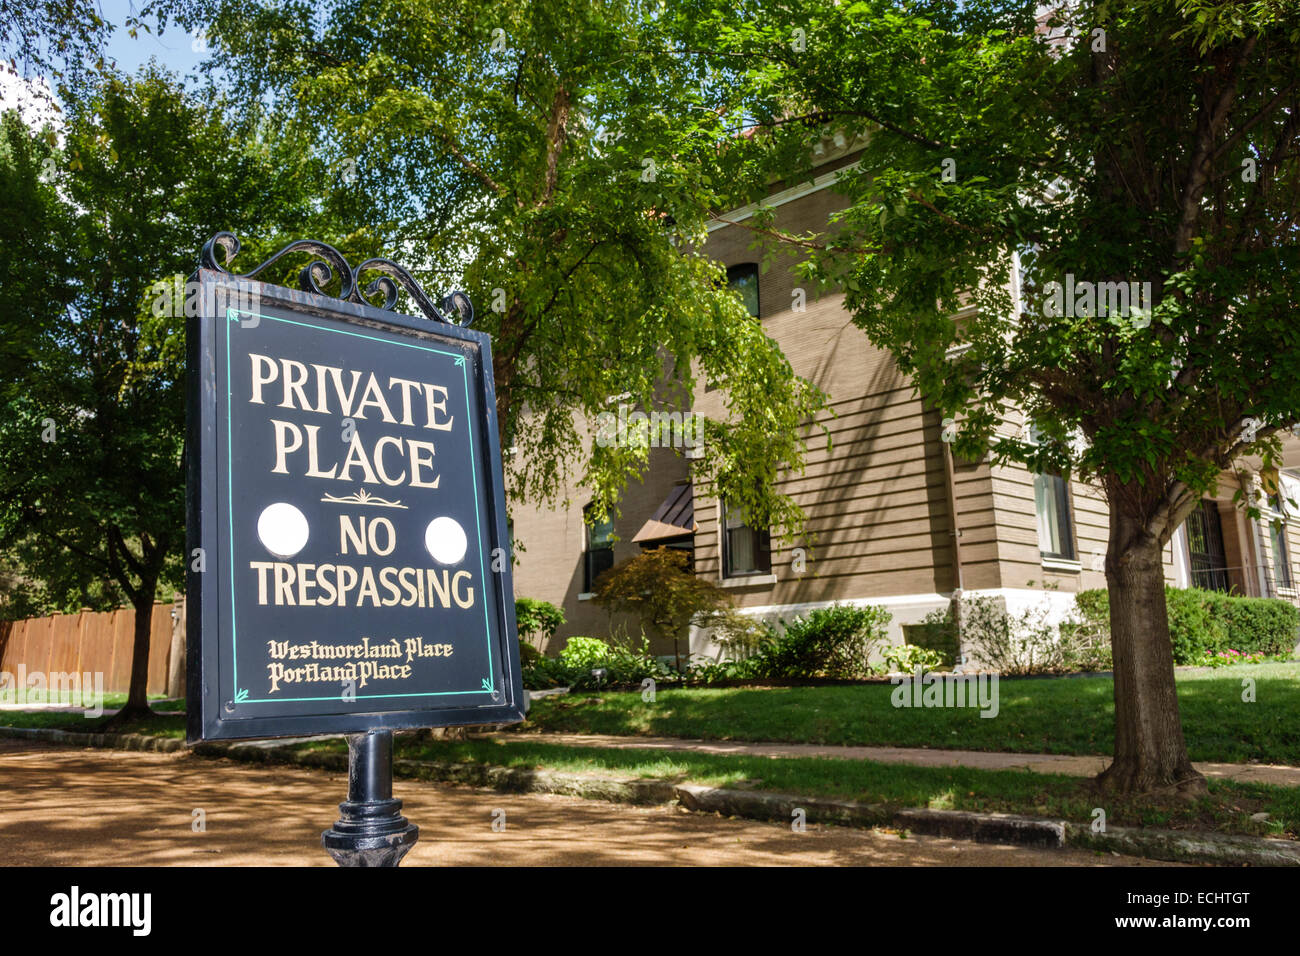 Saint St. Louis Missouri,Central West End,historic neighborhood,Westmoreland Place,Portland Place,private street,sign,no trespassing,exclusive neighbo Stock Photo